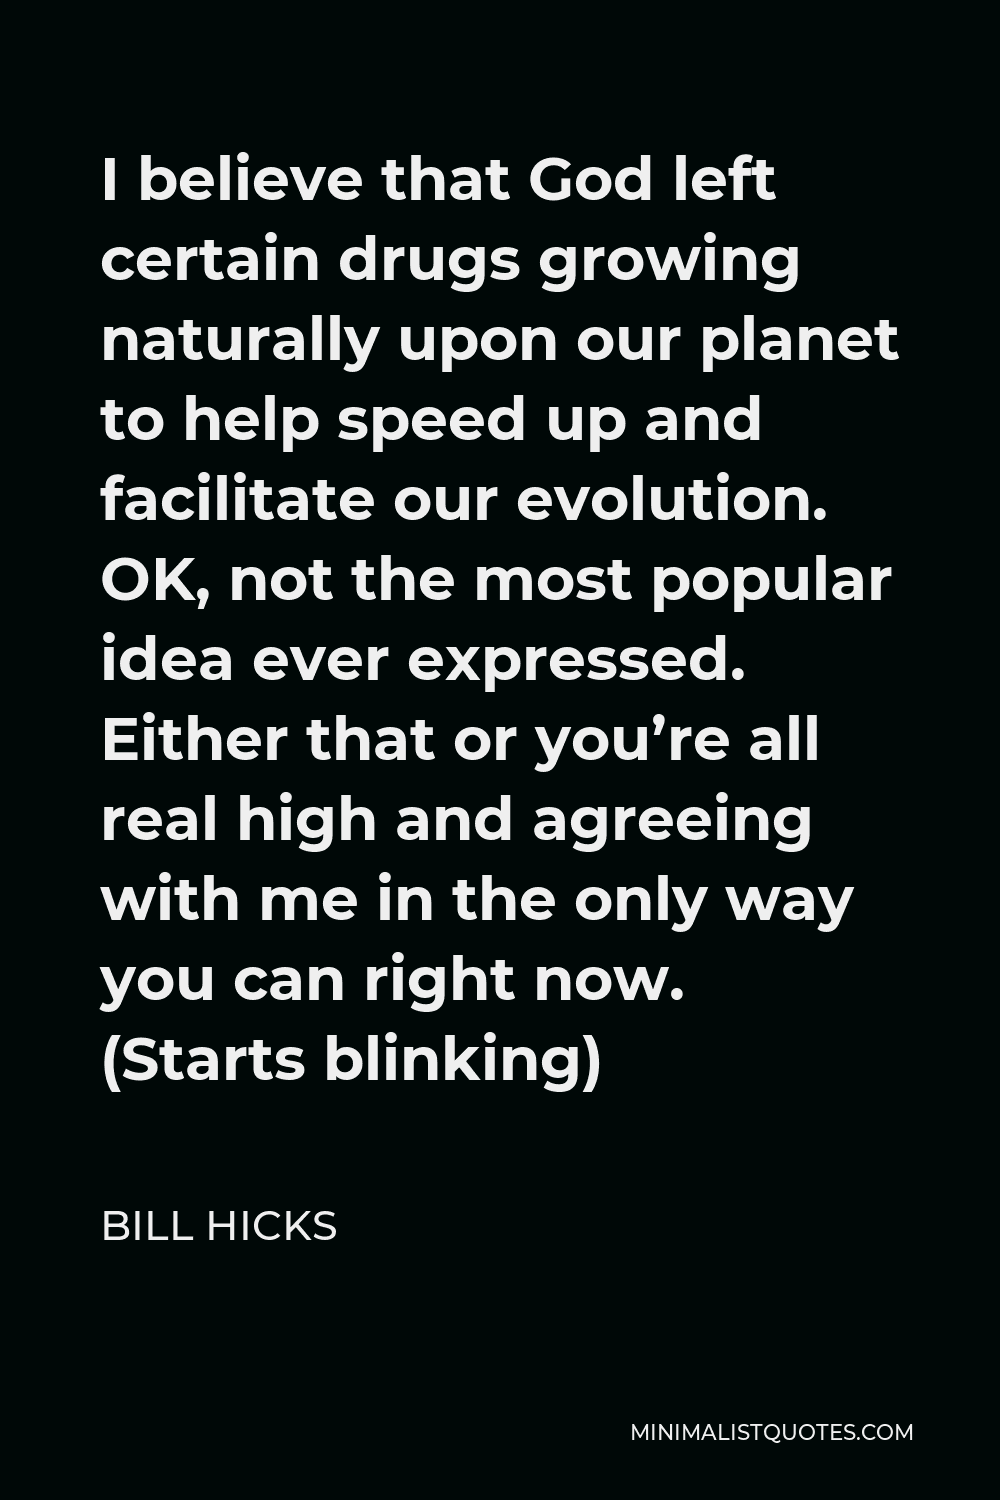 Bill Hicks Quote - I believe that God left certain drugs growing naturally upon our planet to help speed up and facilitate our evolution.